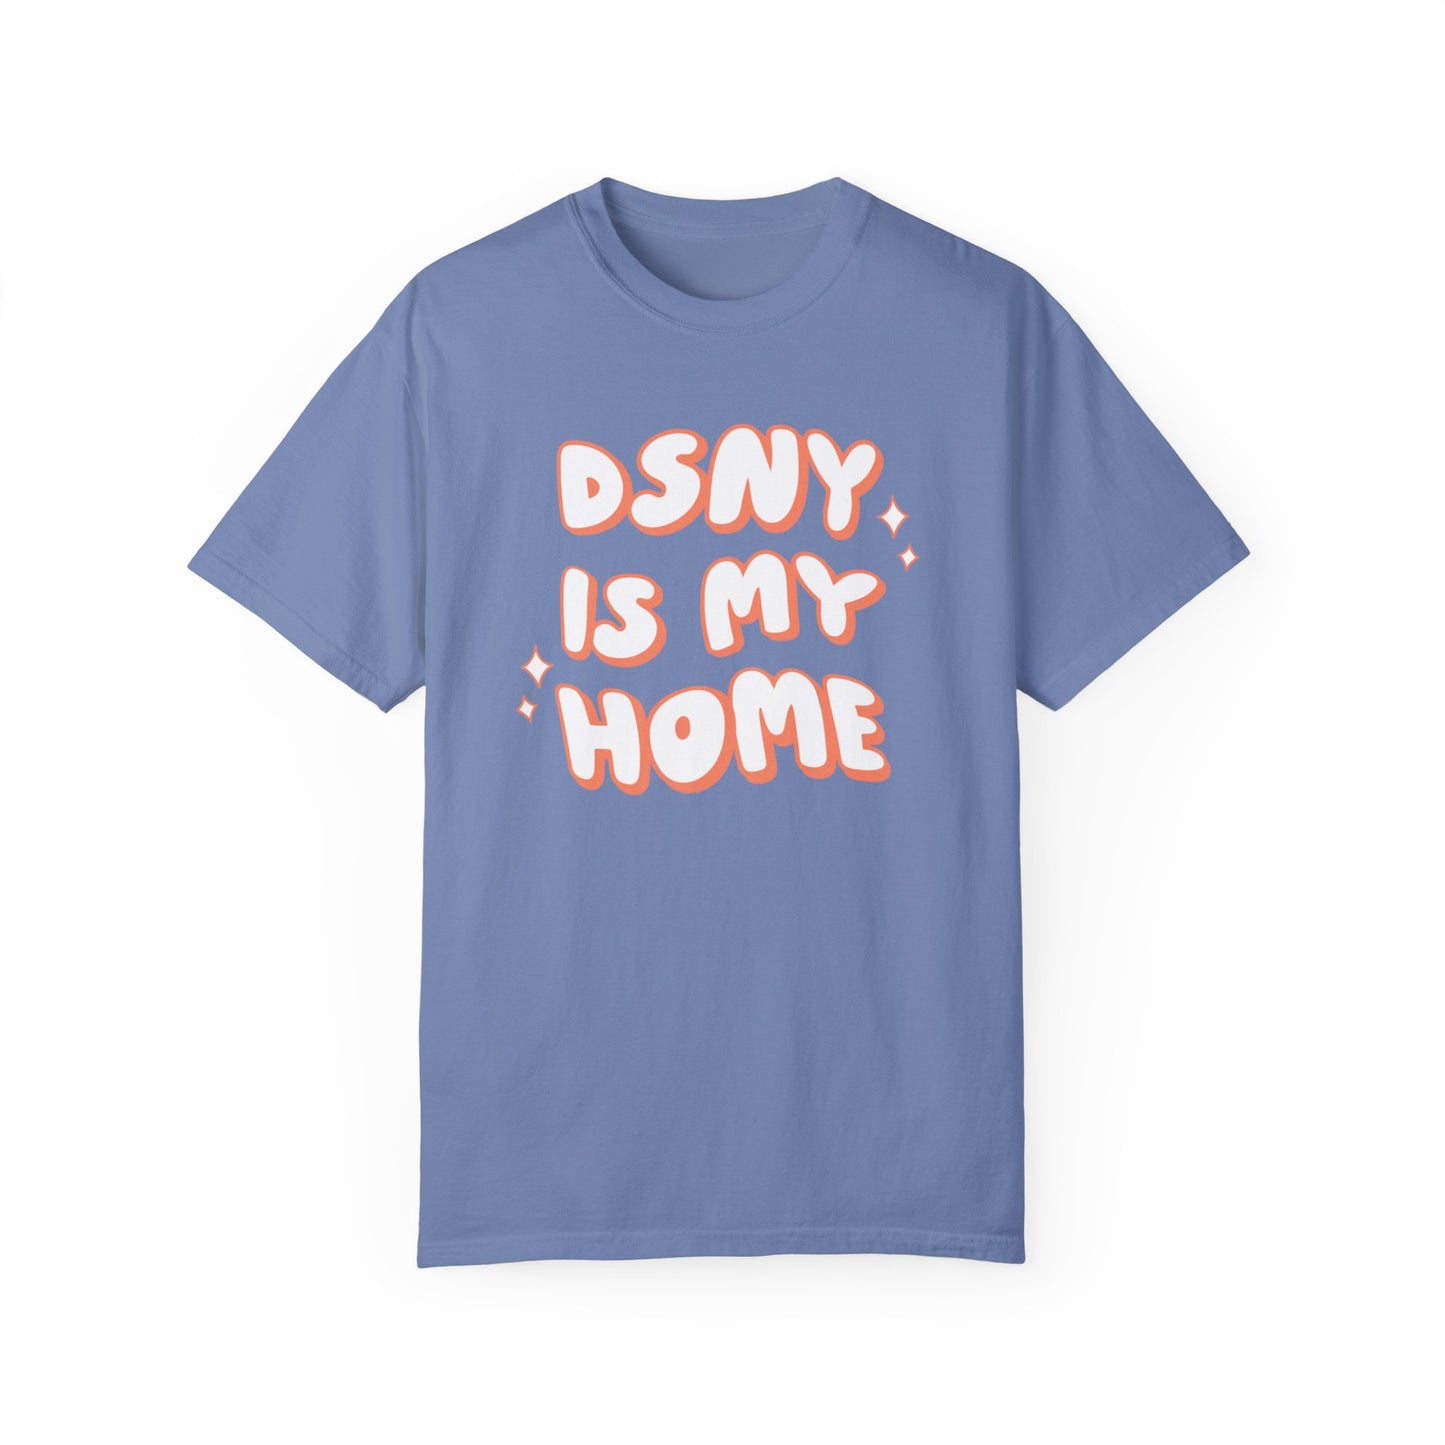 Adult Dsny is home - Comfort Colors